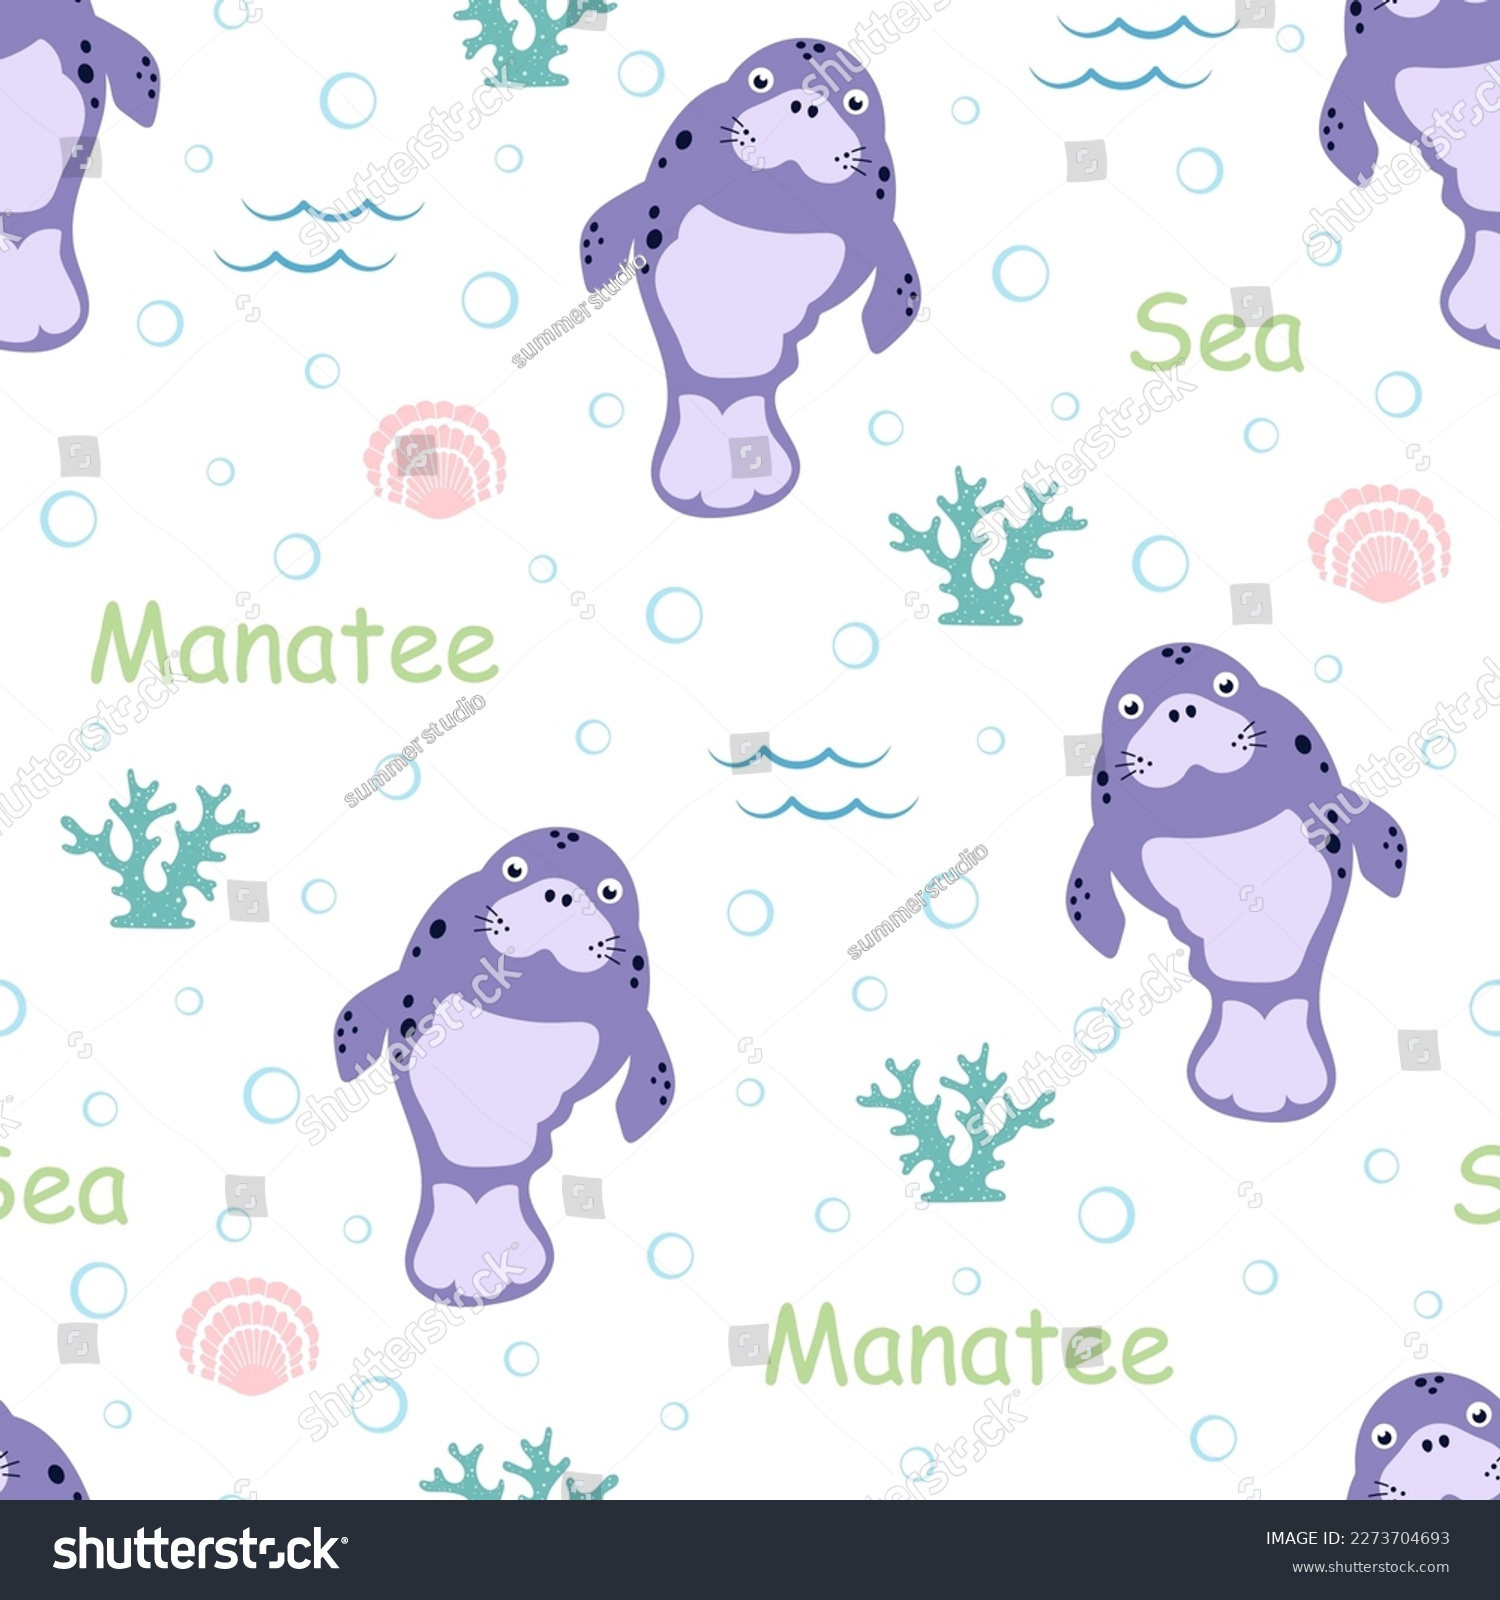 SVG of seamless pattern with cute manatee, cartoon vector illustration with funny dugong for nursery design, wrapping paper, clothing, fabric, flat style svg